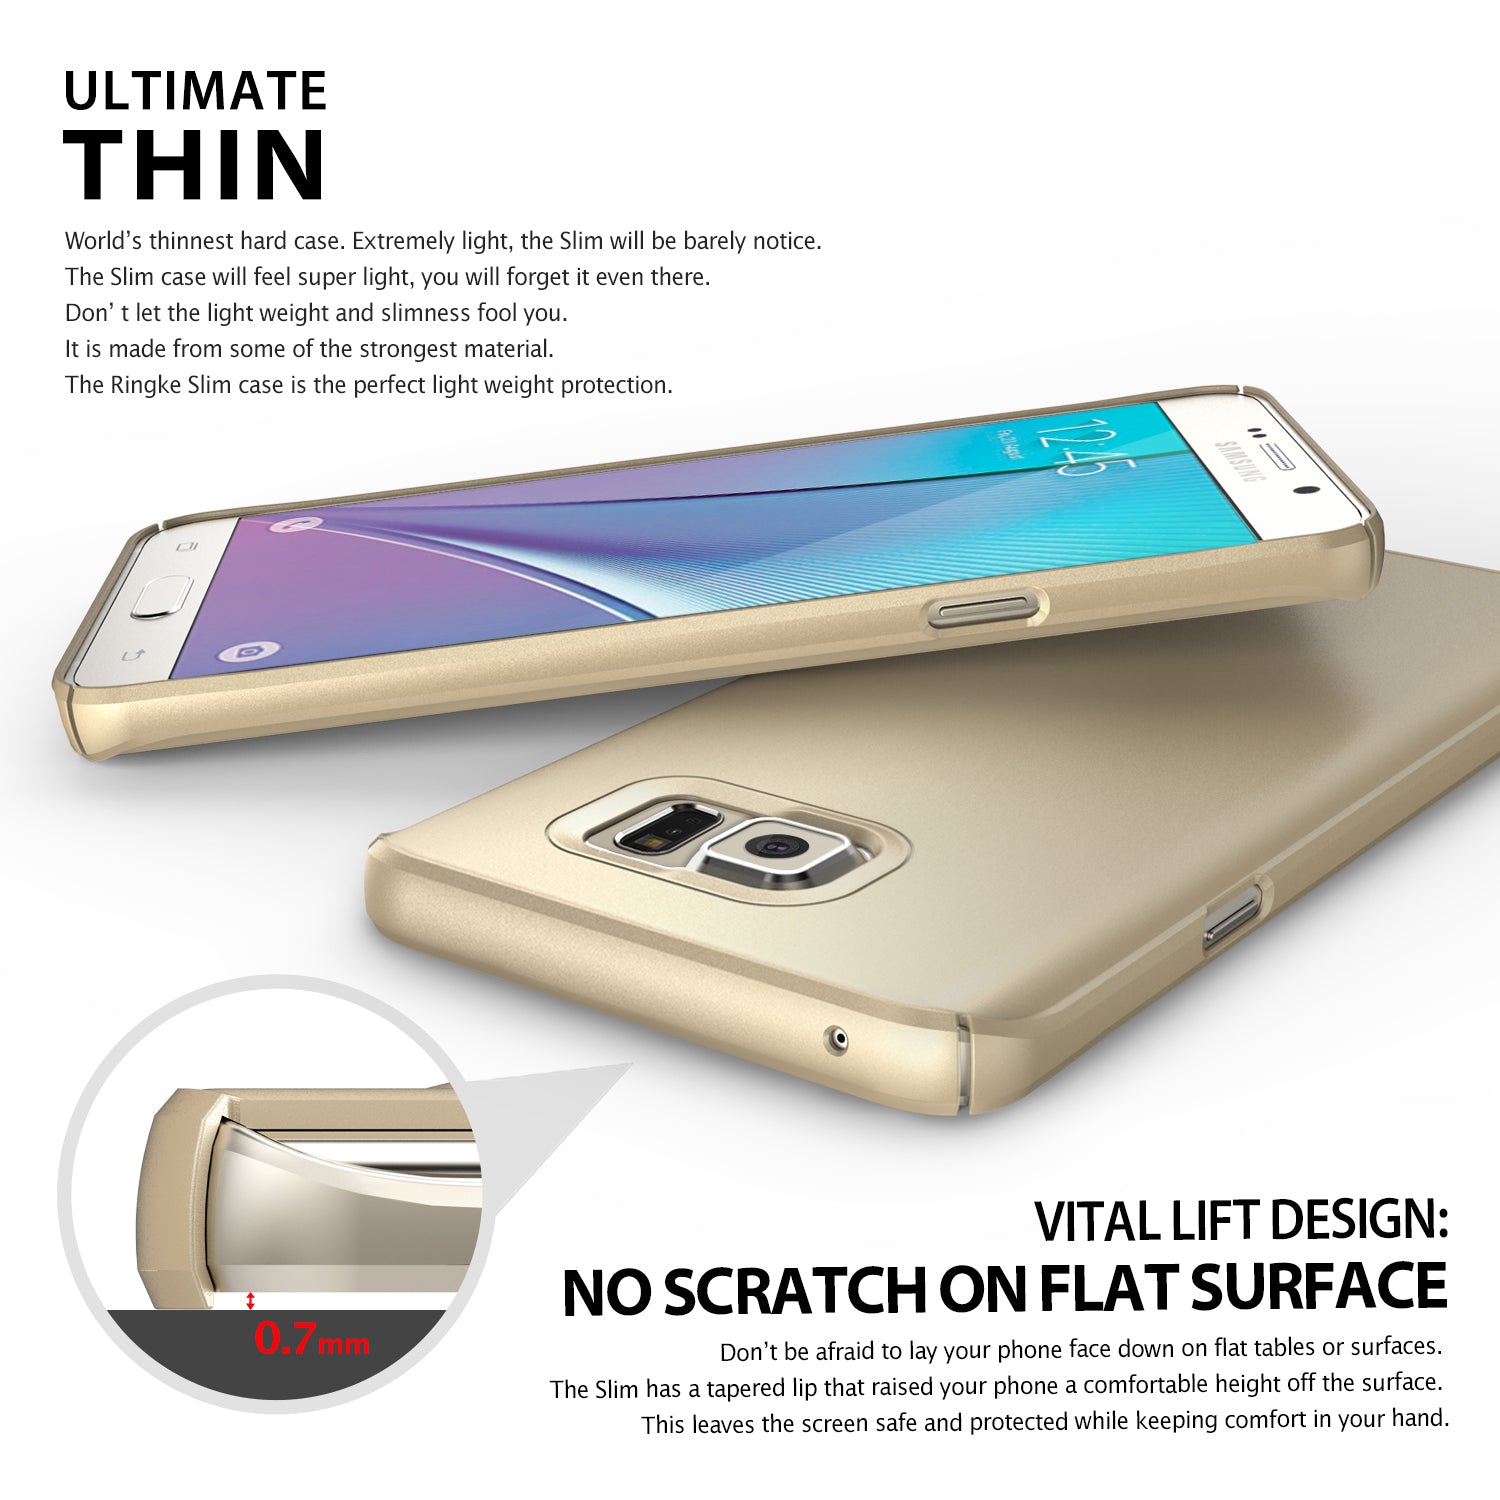 ultimate thin 0.7mm with no scratch on the screen on flat surface thanks to vital lift design